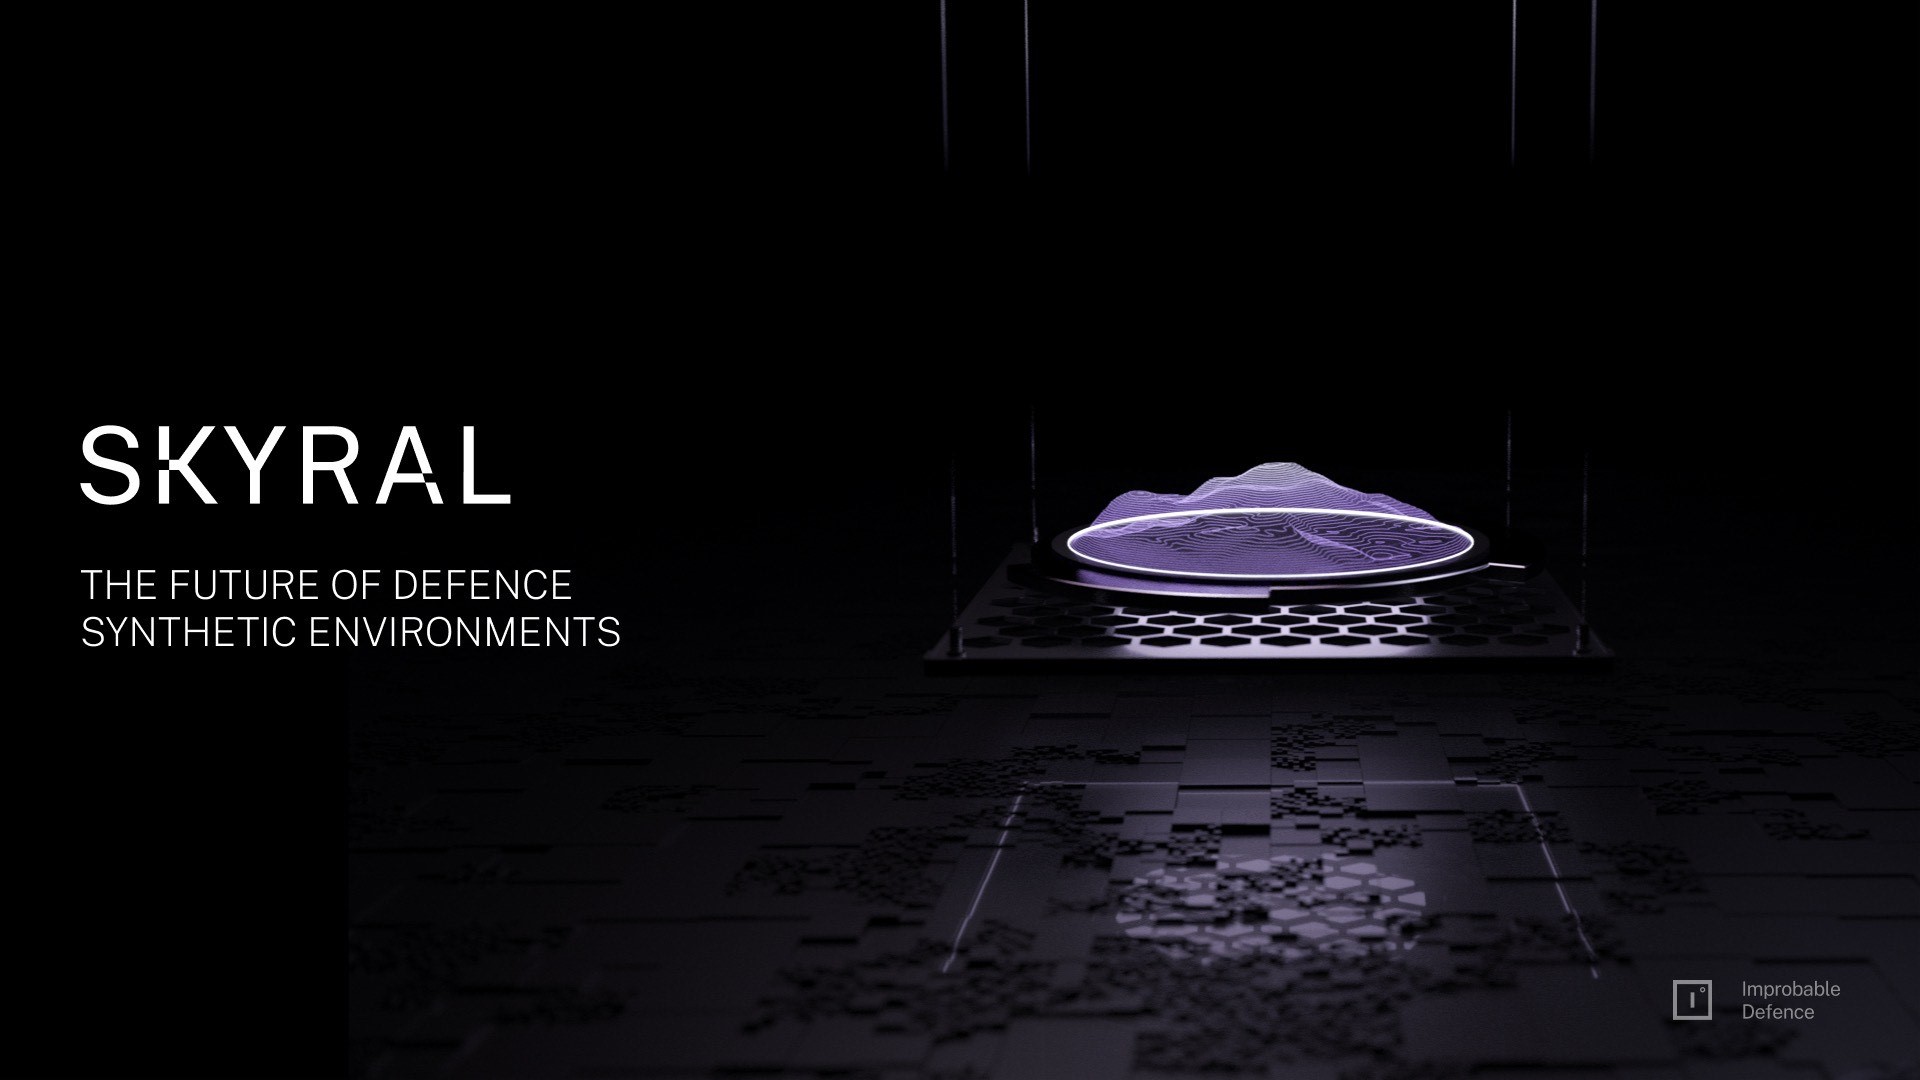 Skyral The Future of Defence Synthetics Environments